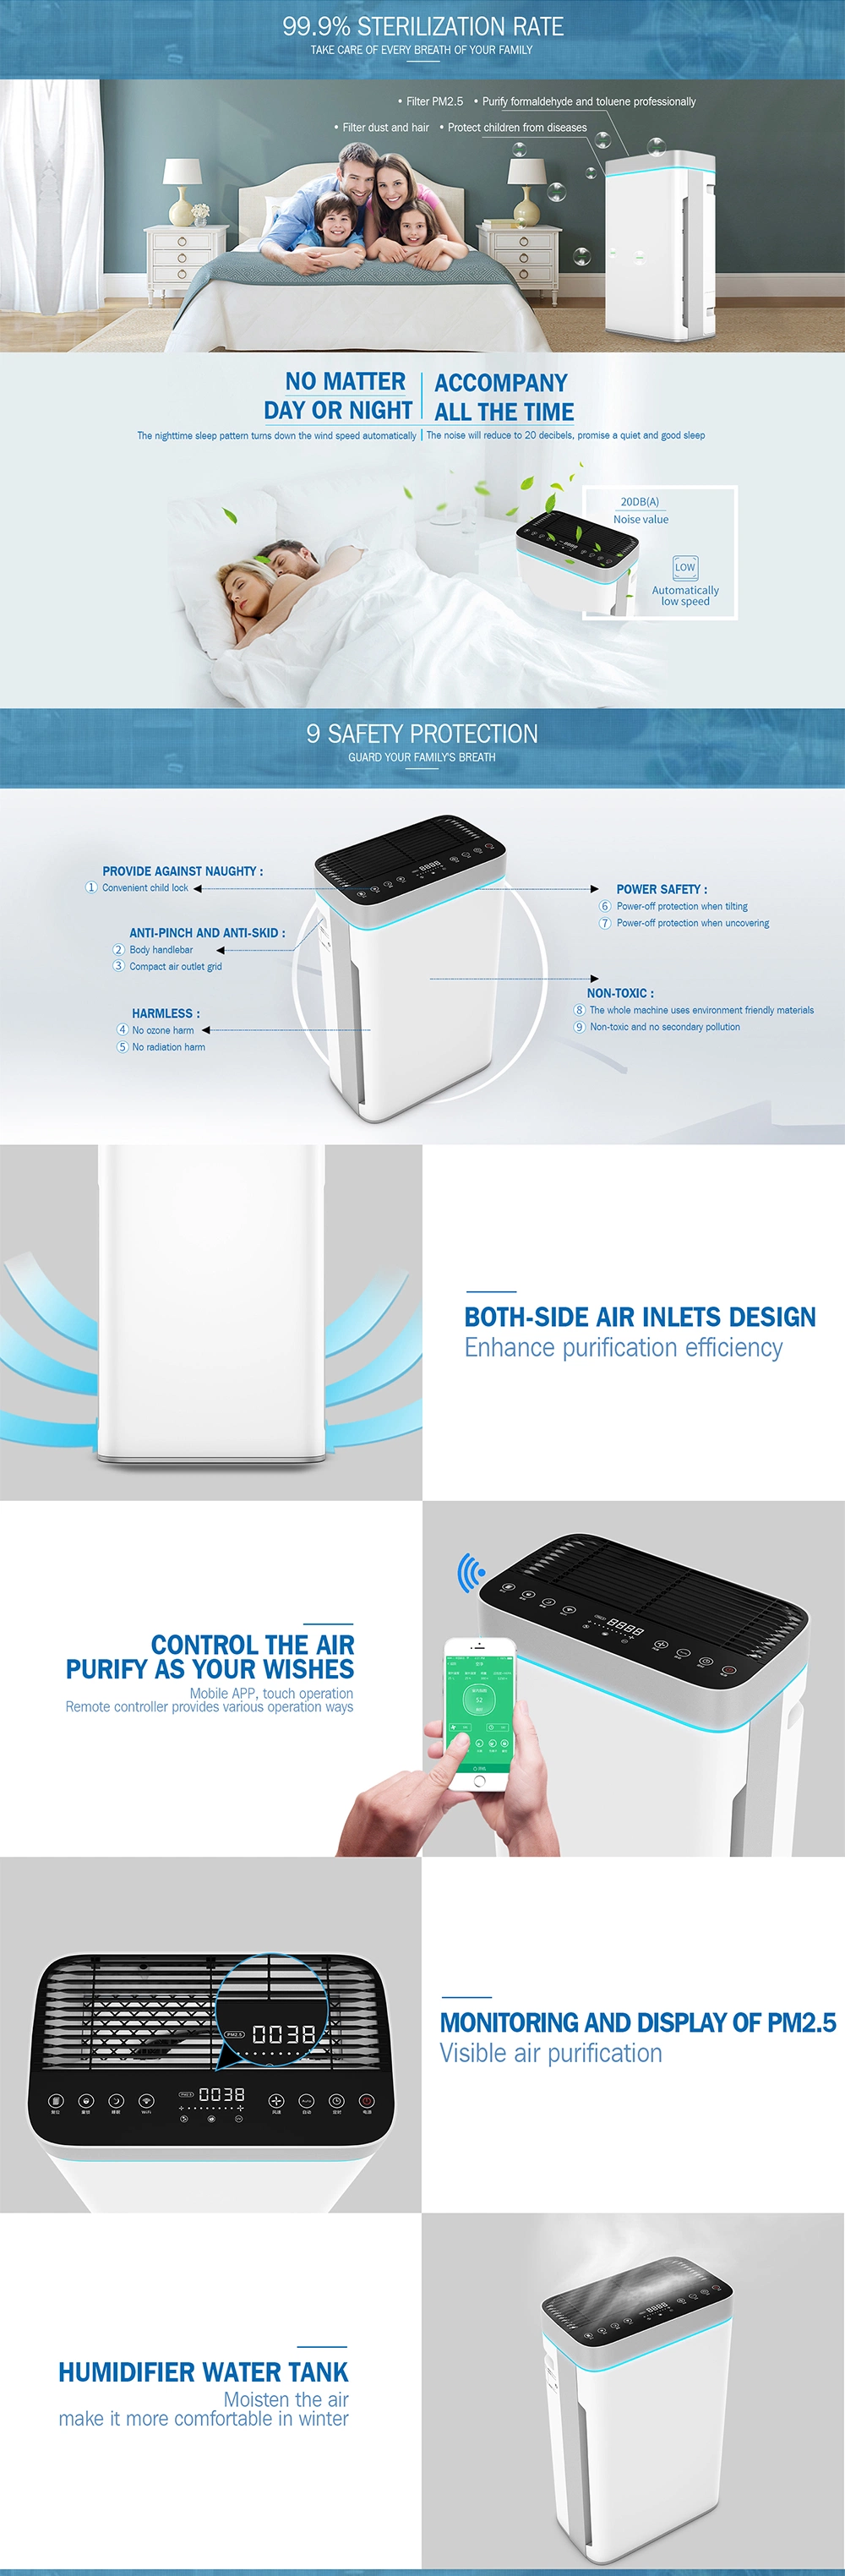 Multi-Function HEPA Filter Air Purifier Floor Standing Air Purifier Dehumidifier with Smart WiFi Control